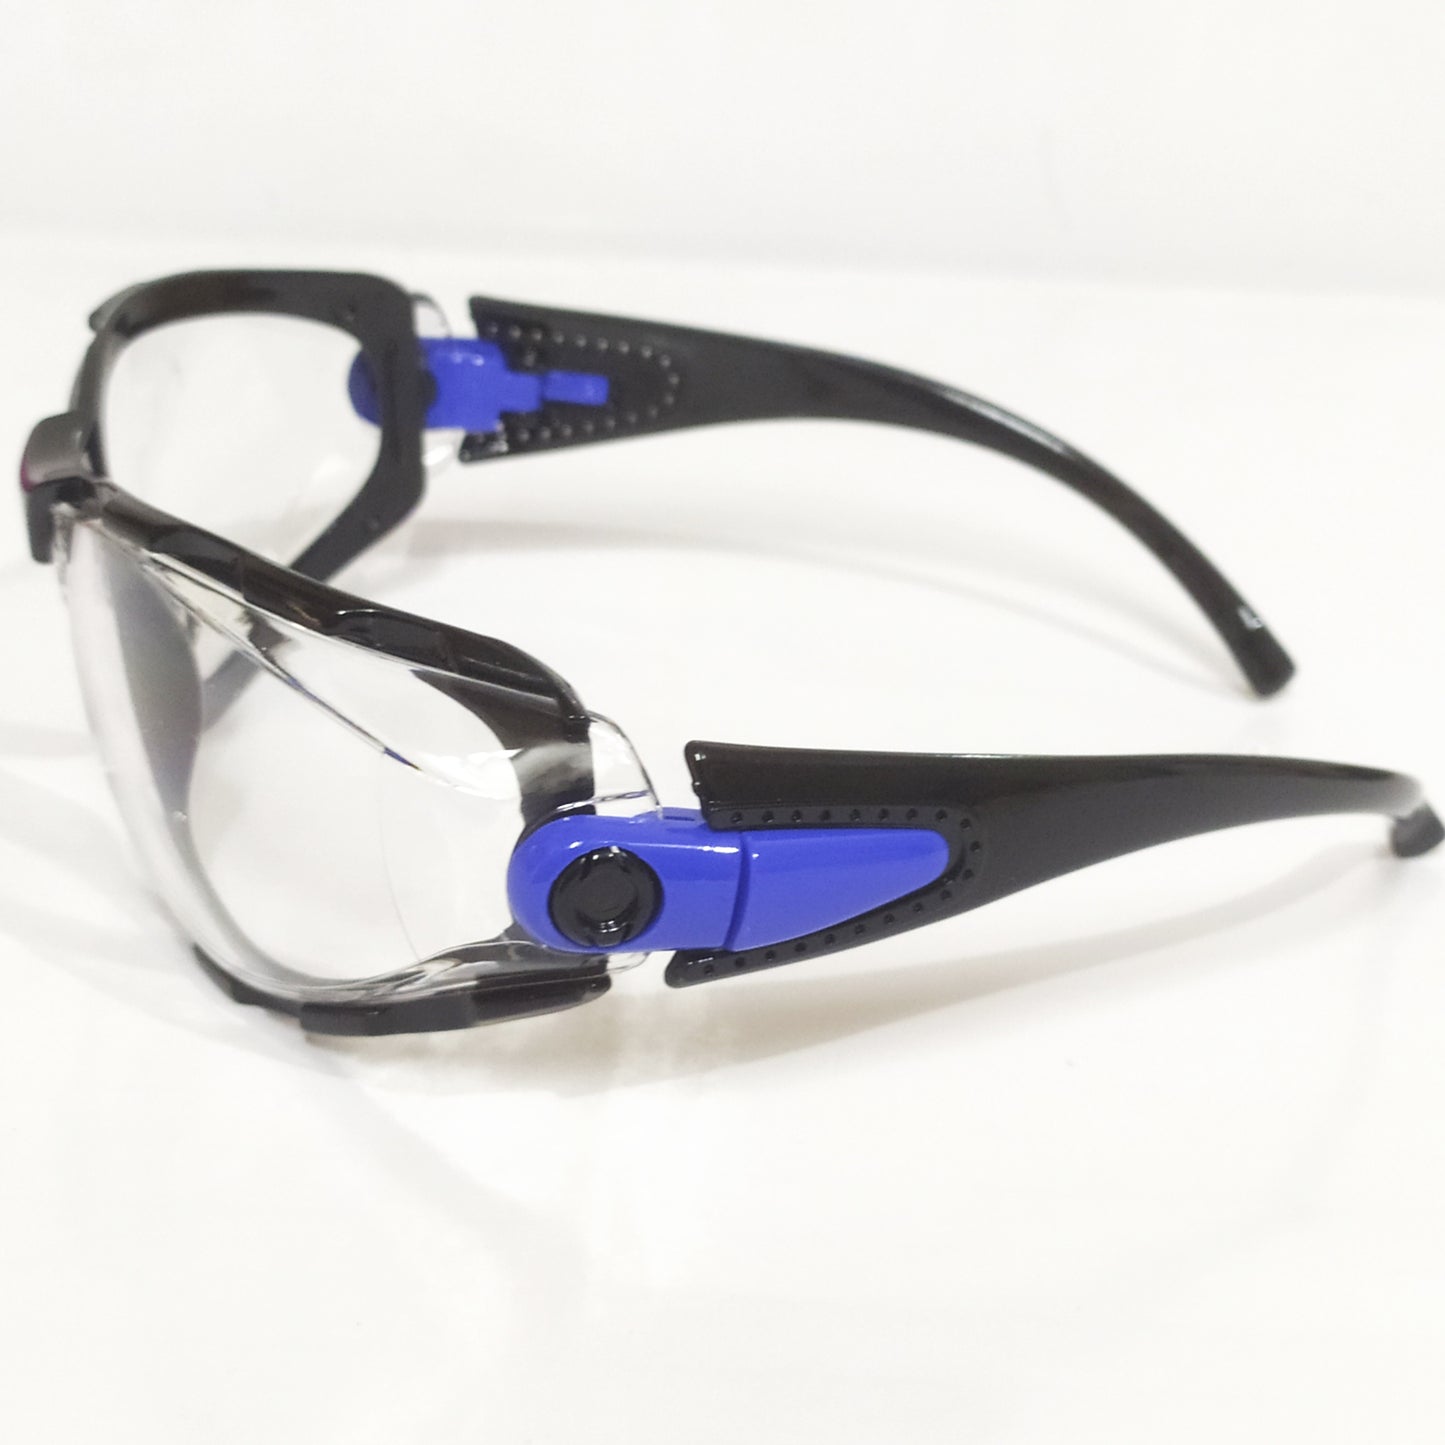 Clear Wraparound Riding Glasses for Bikers Motorcyclist Cyclist